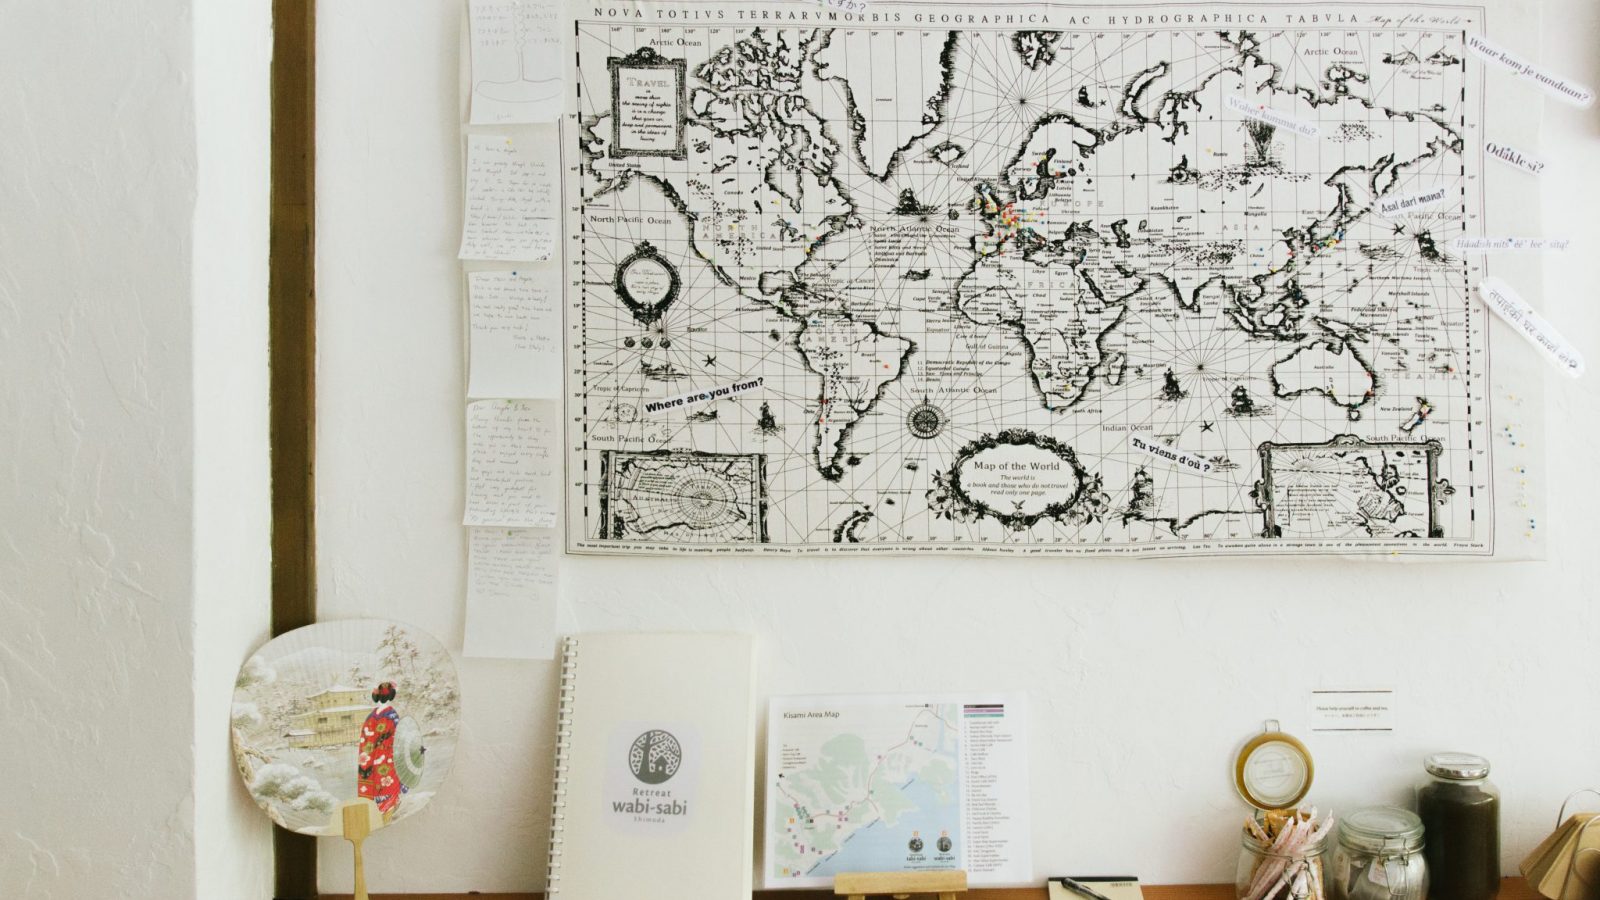 Make your mark on the "where are you from?" map in the kitchen at Retreat wabi-sabi